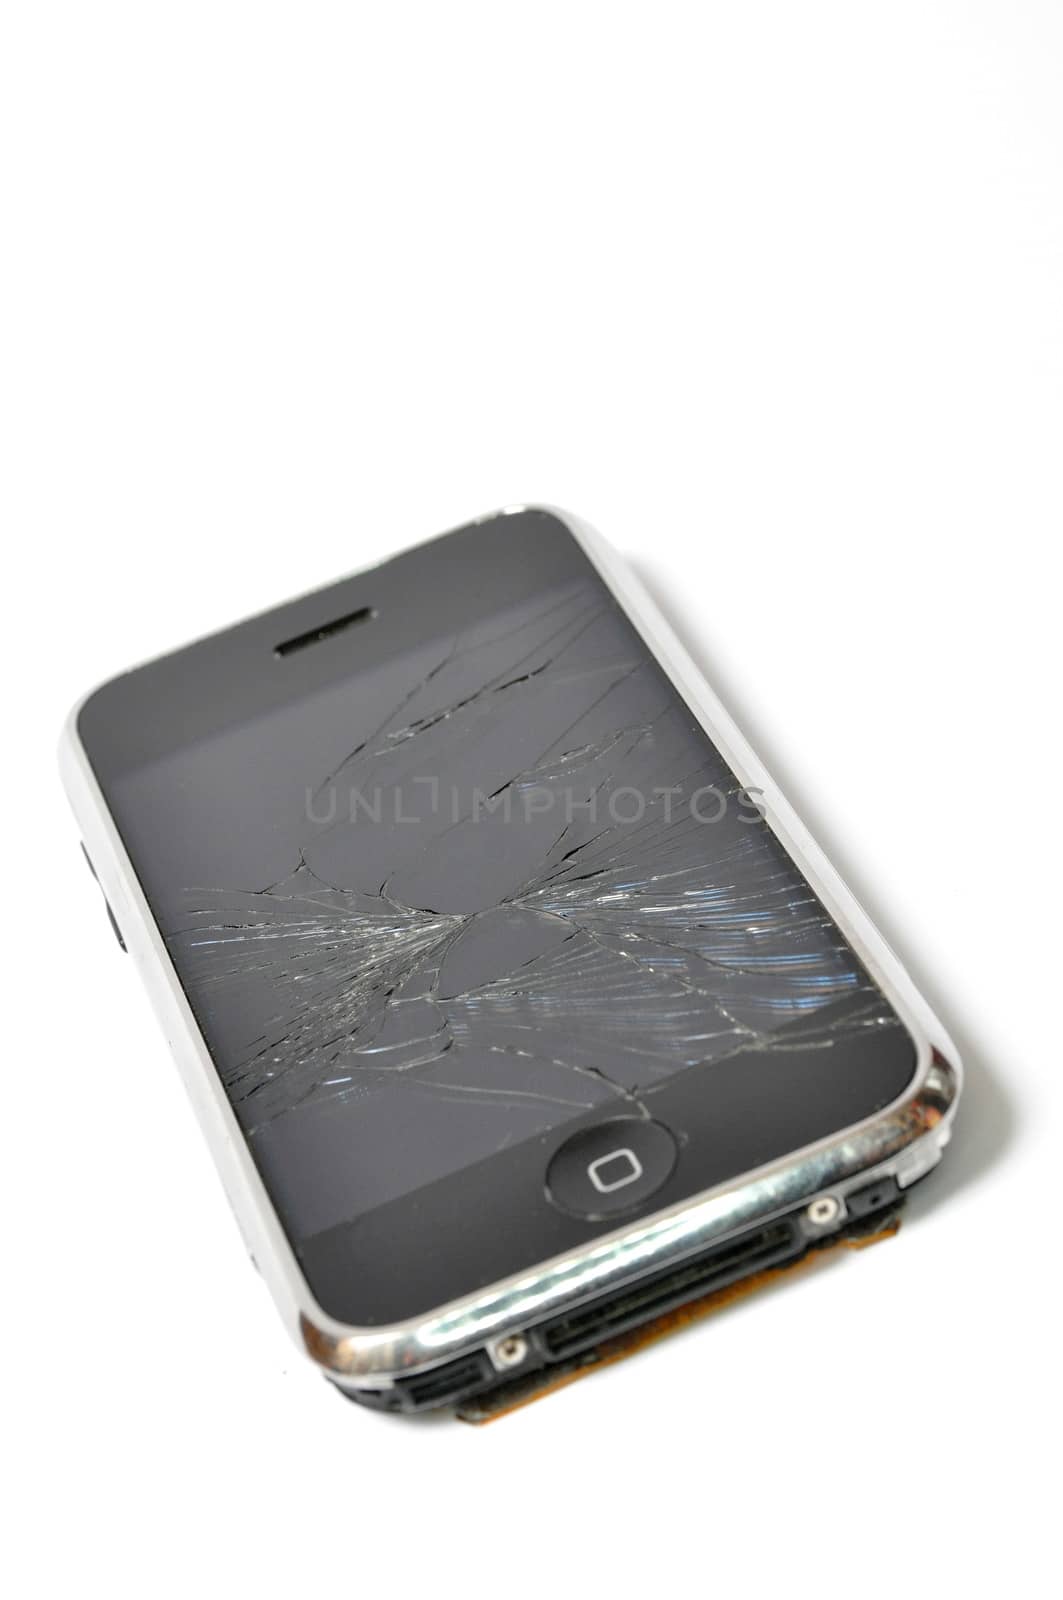 Mobile phone with broken screen by anderm